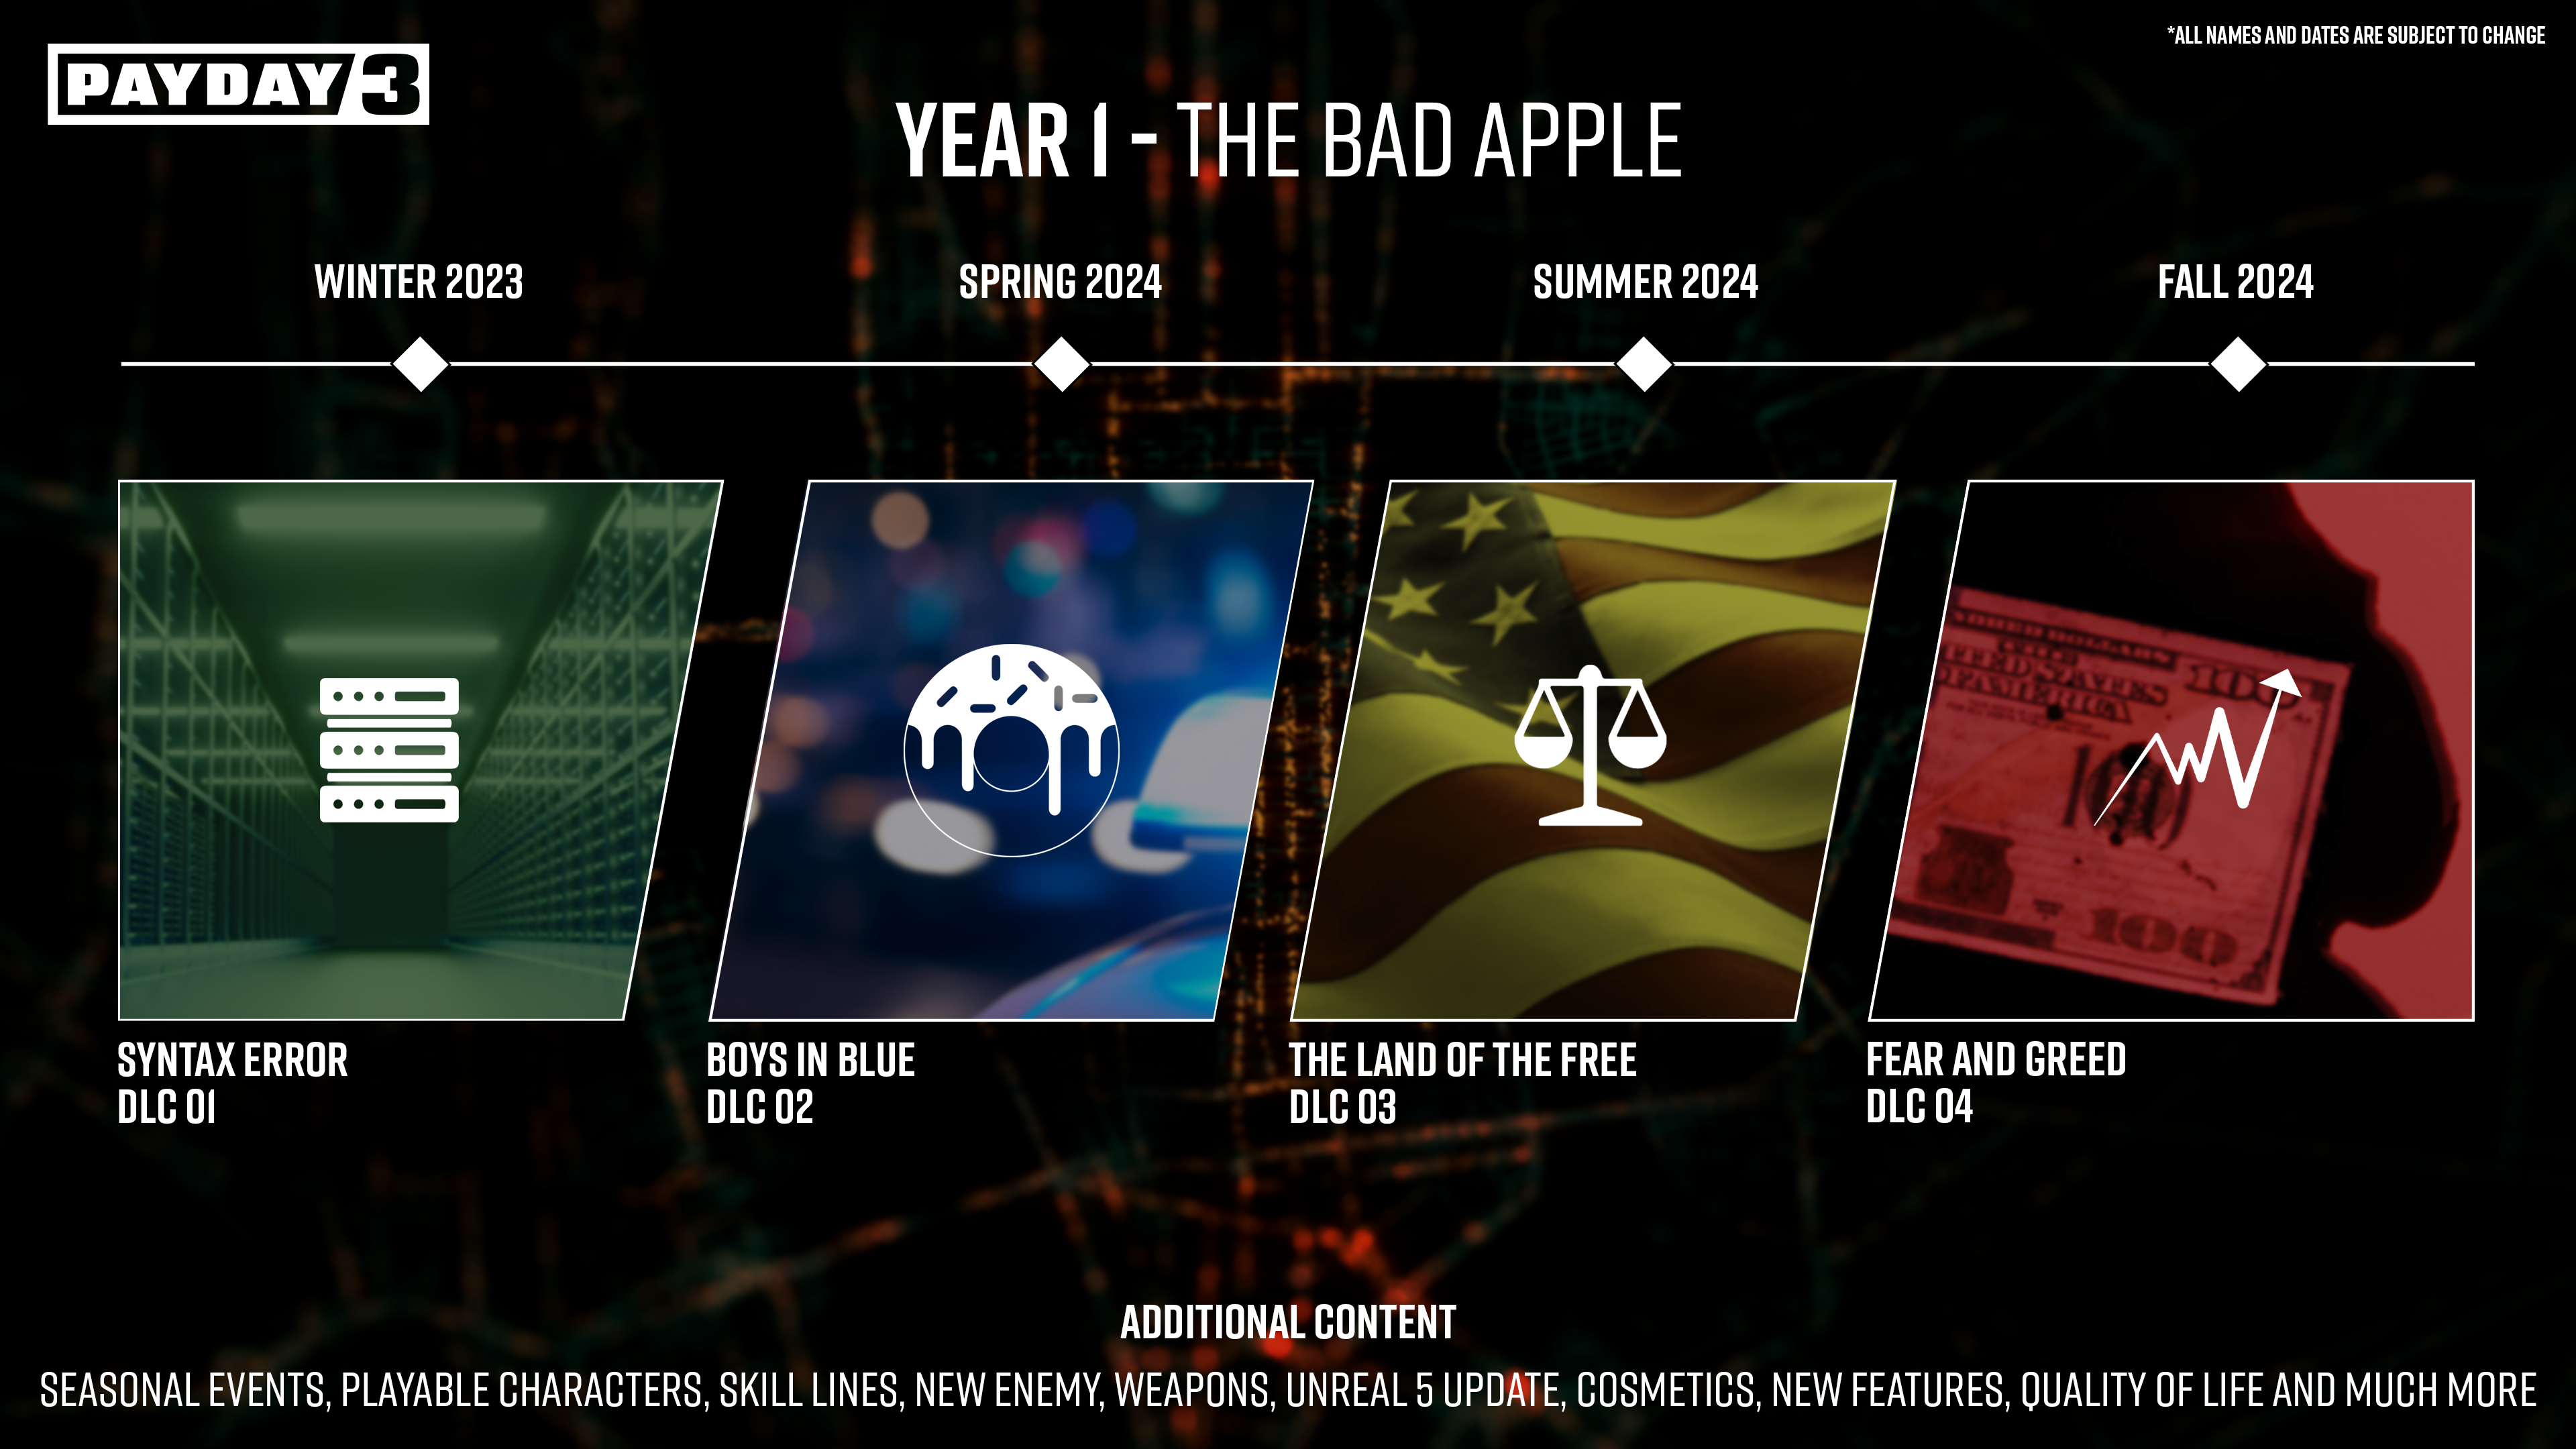 The official Payday 3 roadmap for year one, including four DLC: Syntax Error (Winter 2023); Boys in Blue (Spring 2024); The Land of the Free (Summer 2024); and Fear and Greed (Fall 2024).